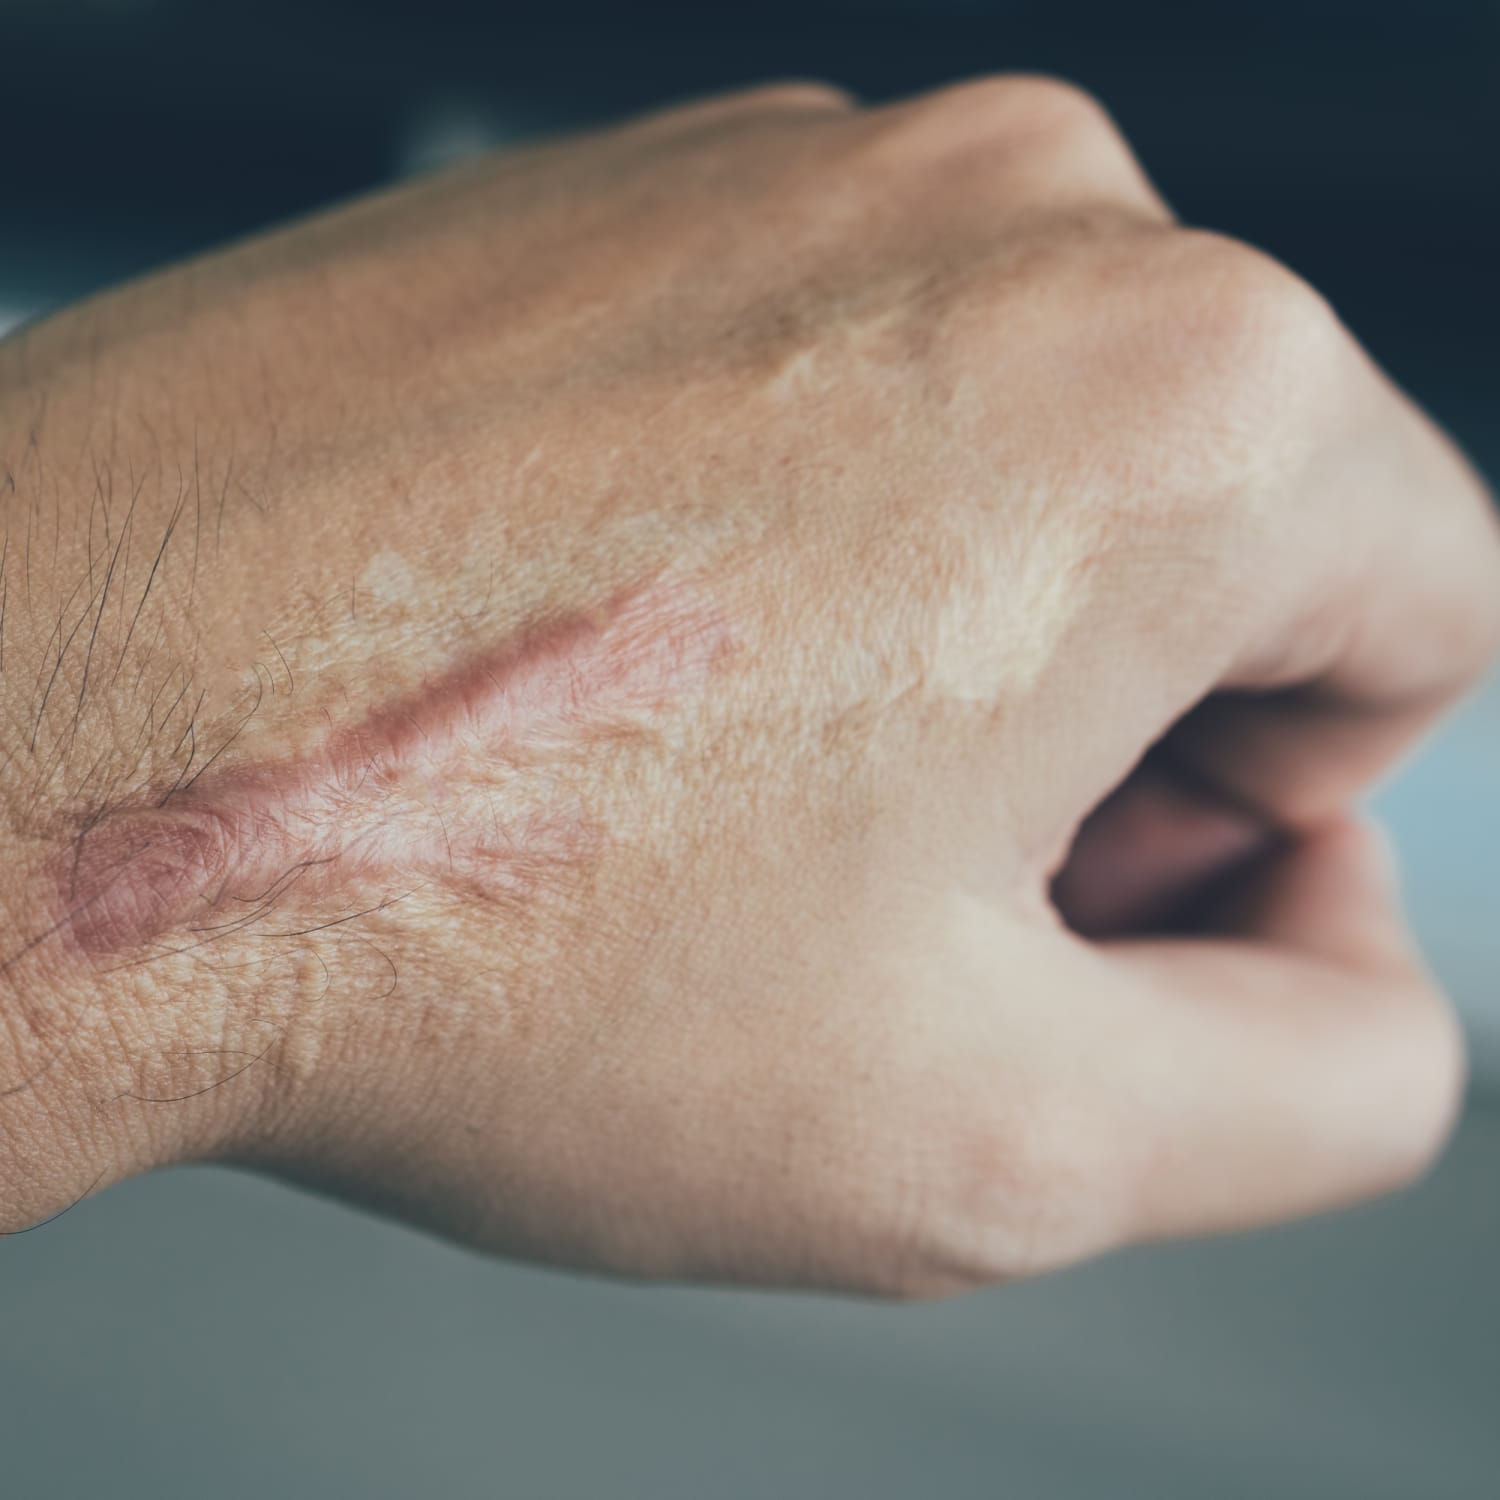 How to Break Up Scar Tissue: Effective Treatment Options